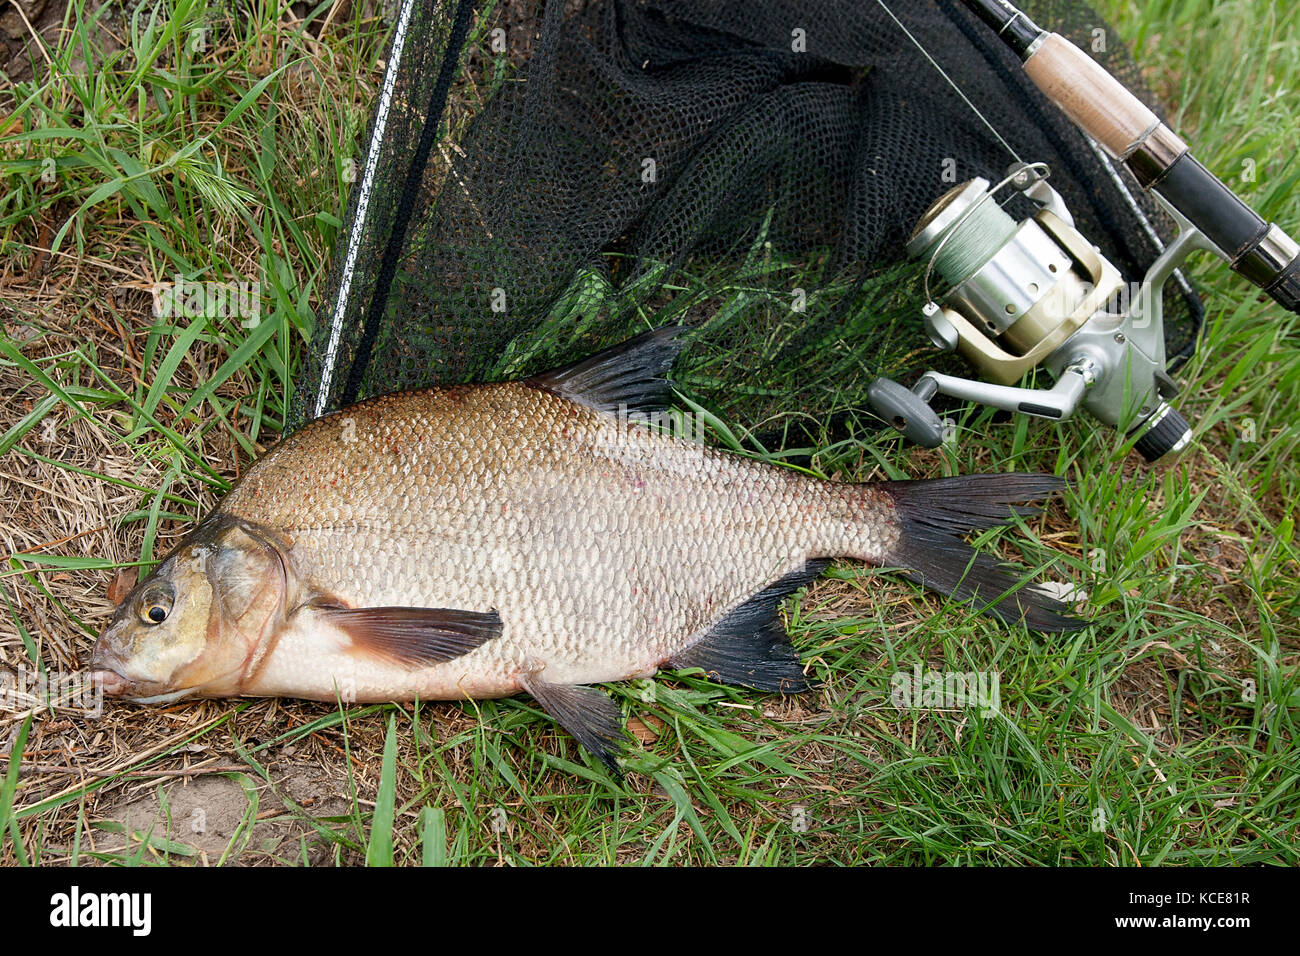 Just taken from the water freshwater common bream known as bronze bream or carp bream (Abramis brama) and fishing rod with reel on natural background. Stock Photo